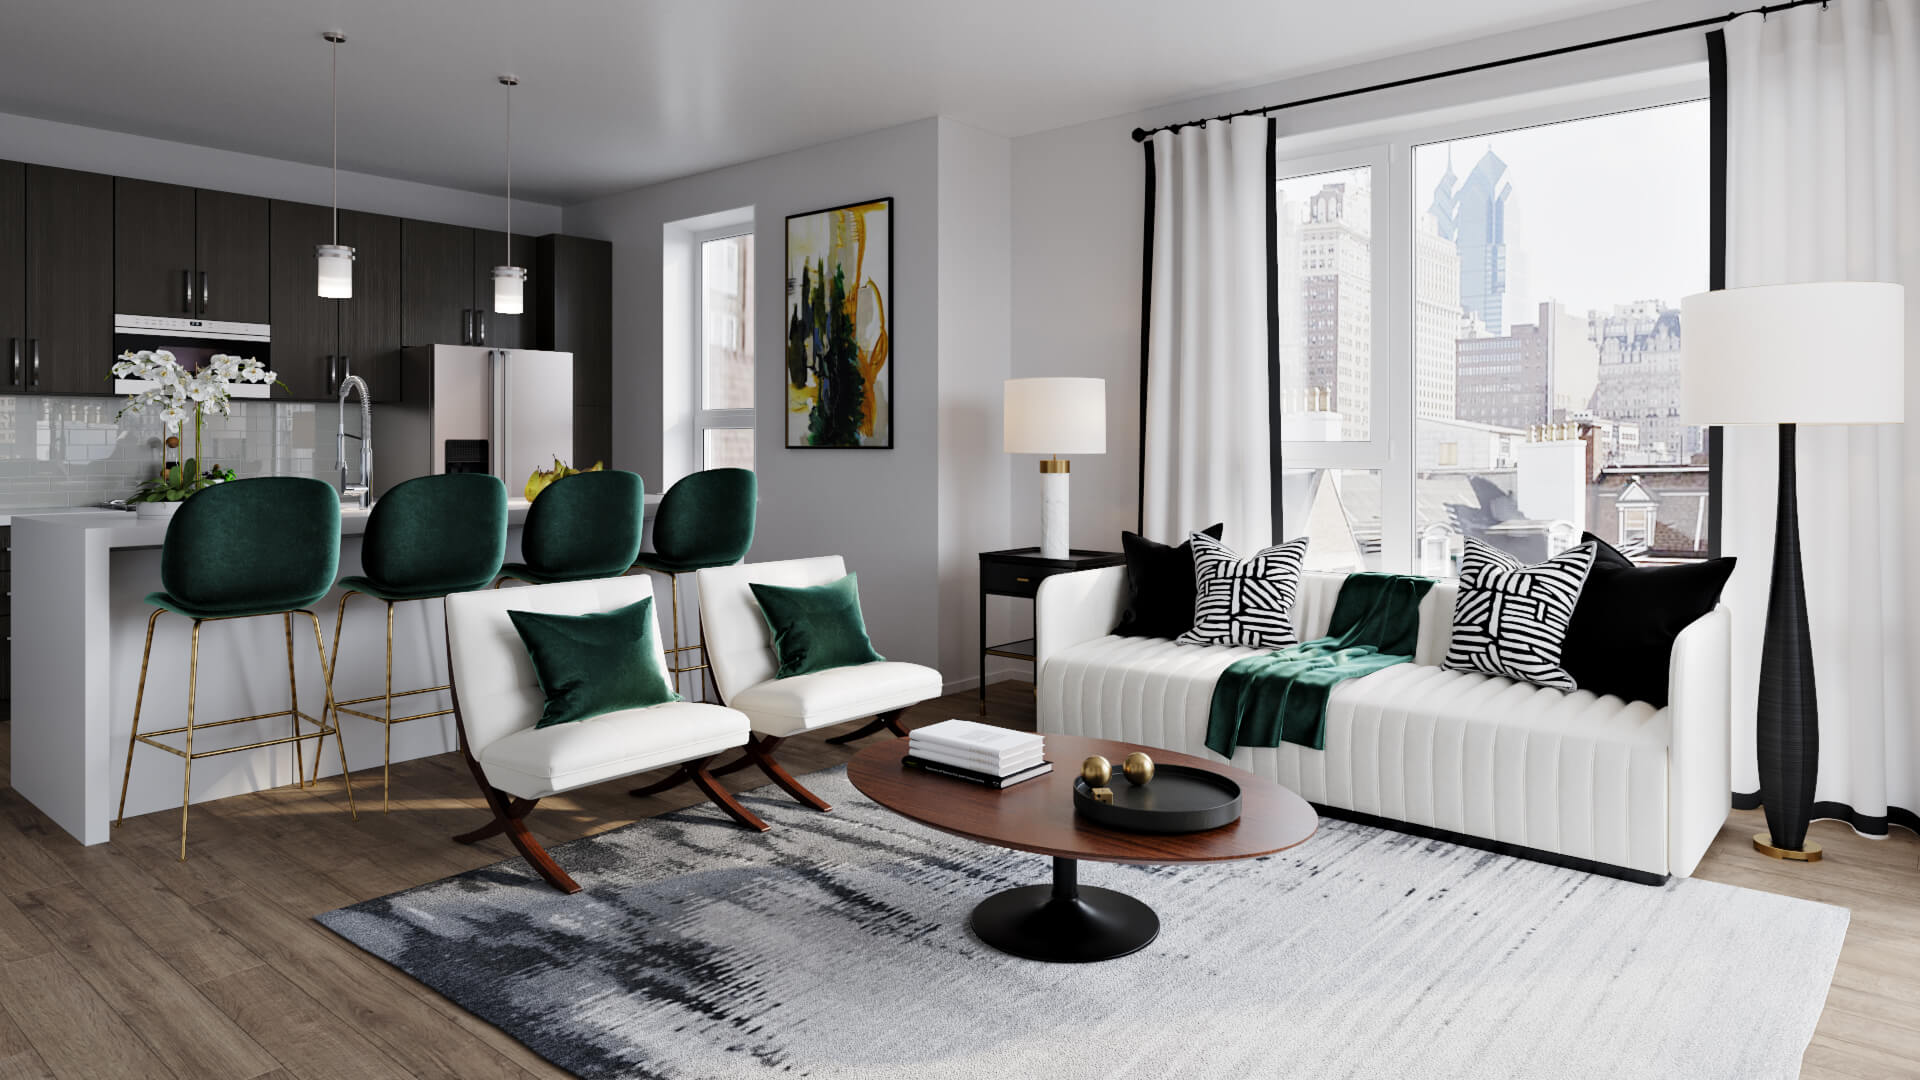 Living Room Rendering 10 Outstanding Examples by ArchiCGI